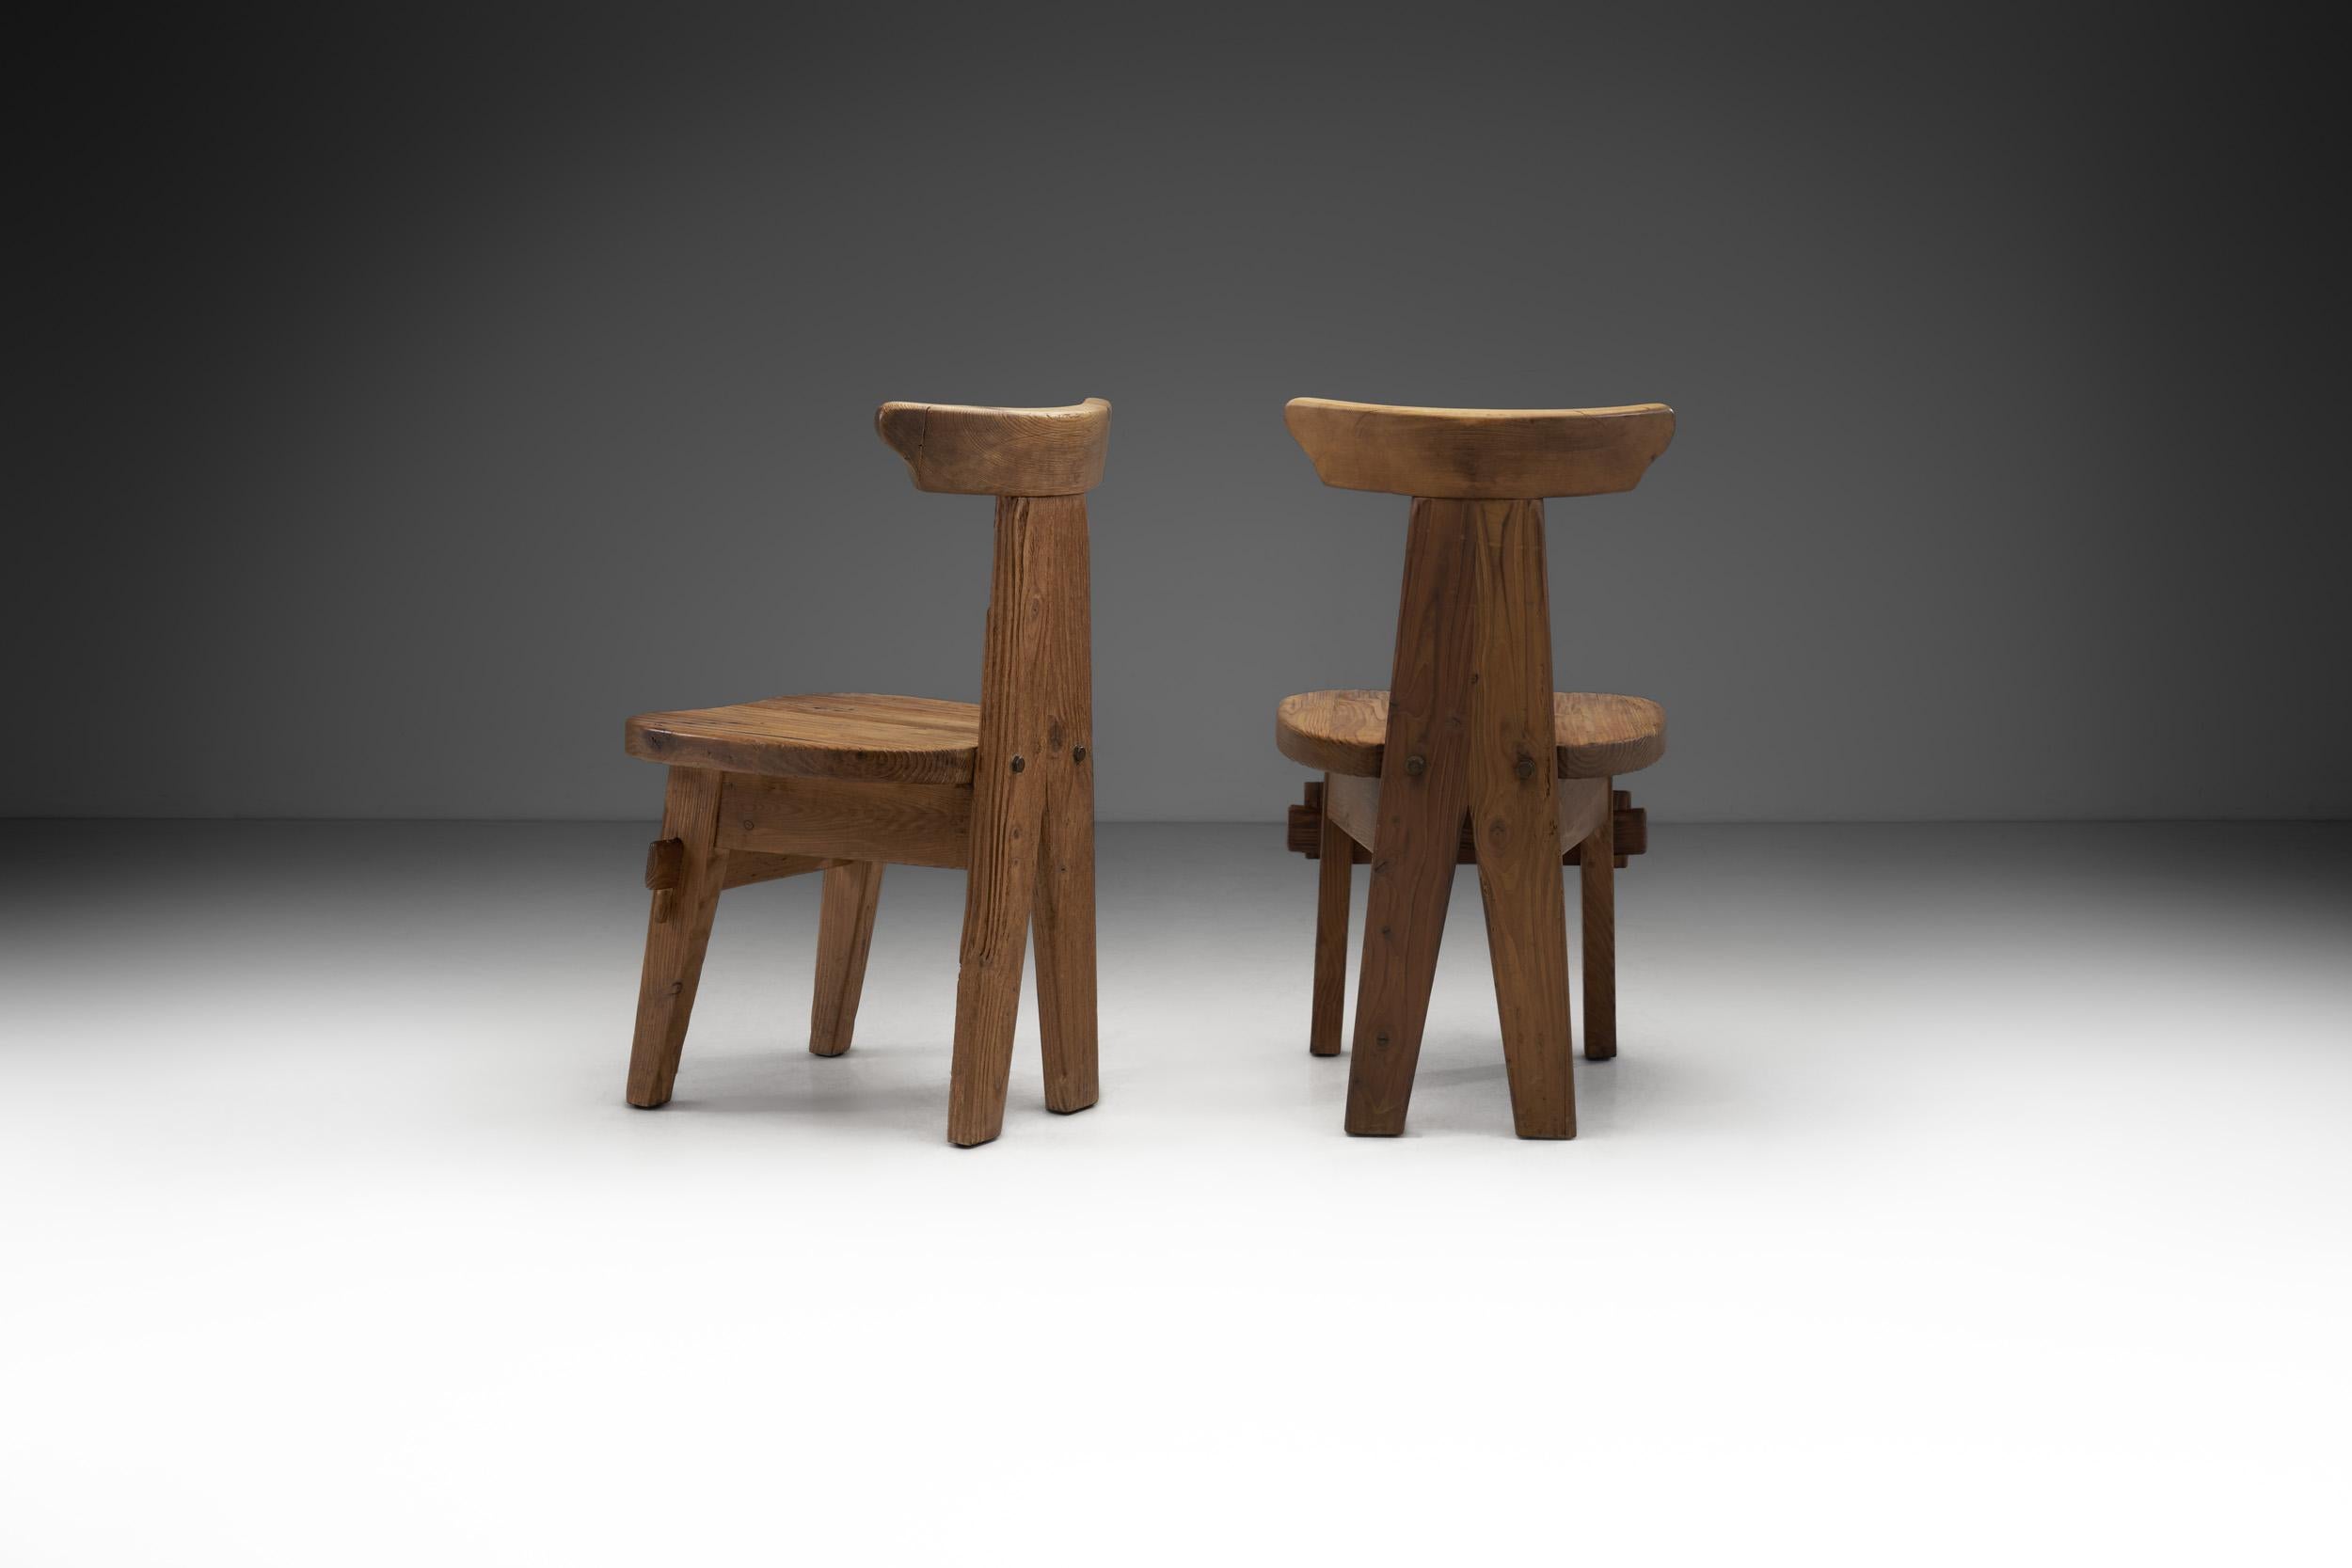 Mid-20th Century Solid Wood Brutalist Chairs with Mortise and Tenon Joinery, Europe, circa 1960s